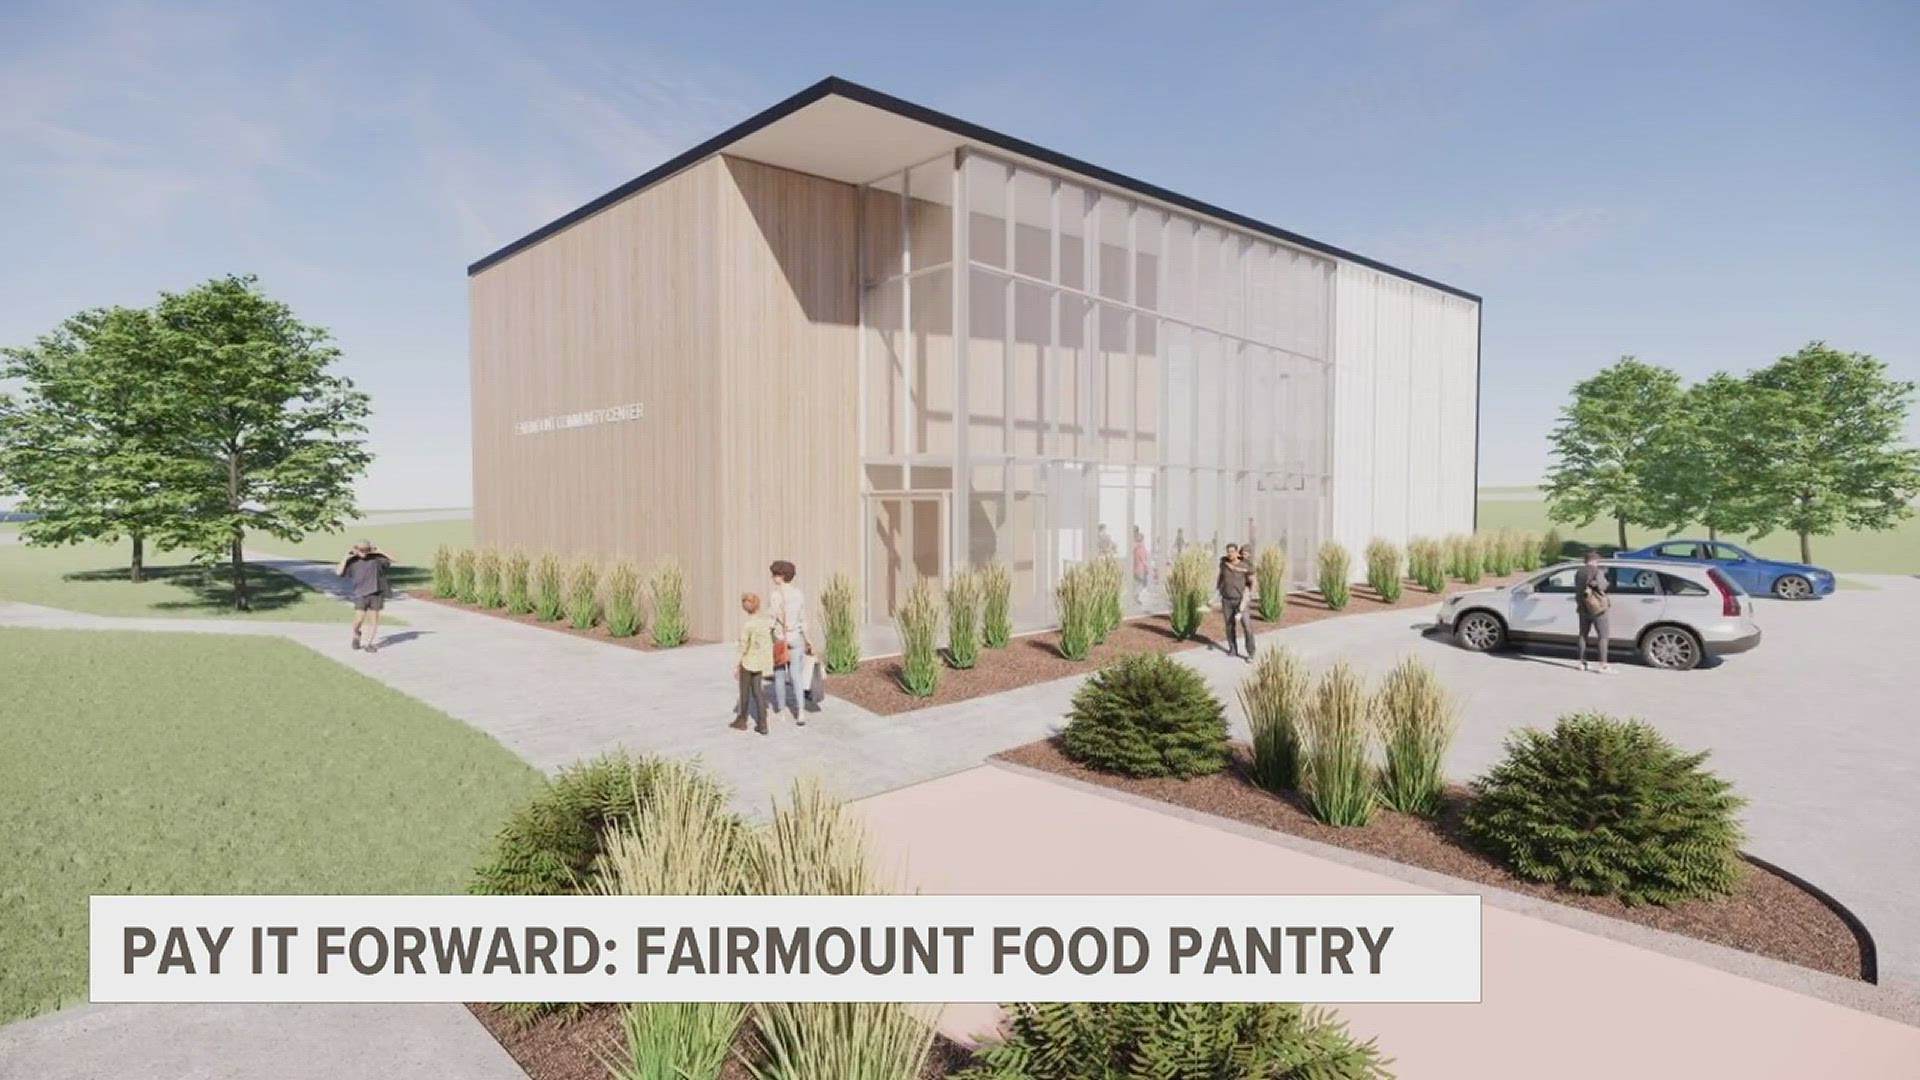 Tammy Trice has been running the Fairmount Food Pantry since opening back in February, and has dedicated herself to keeping food on hand for those in need.